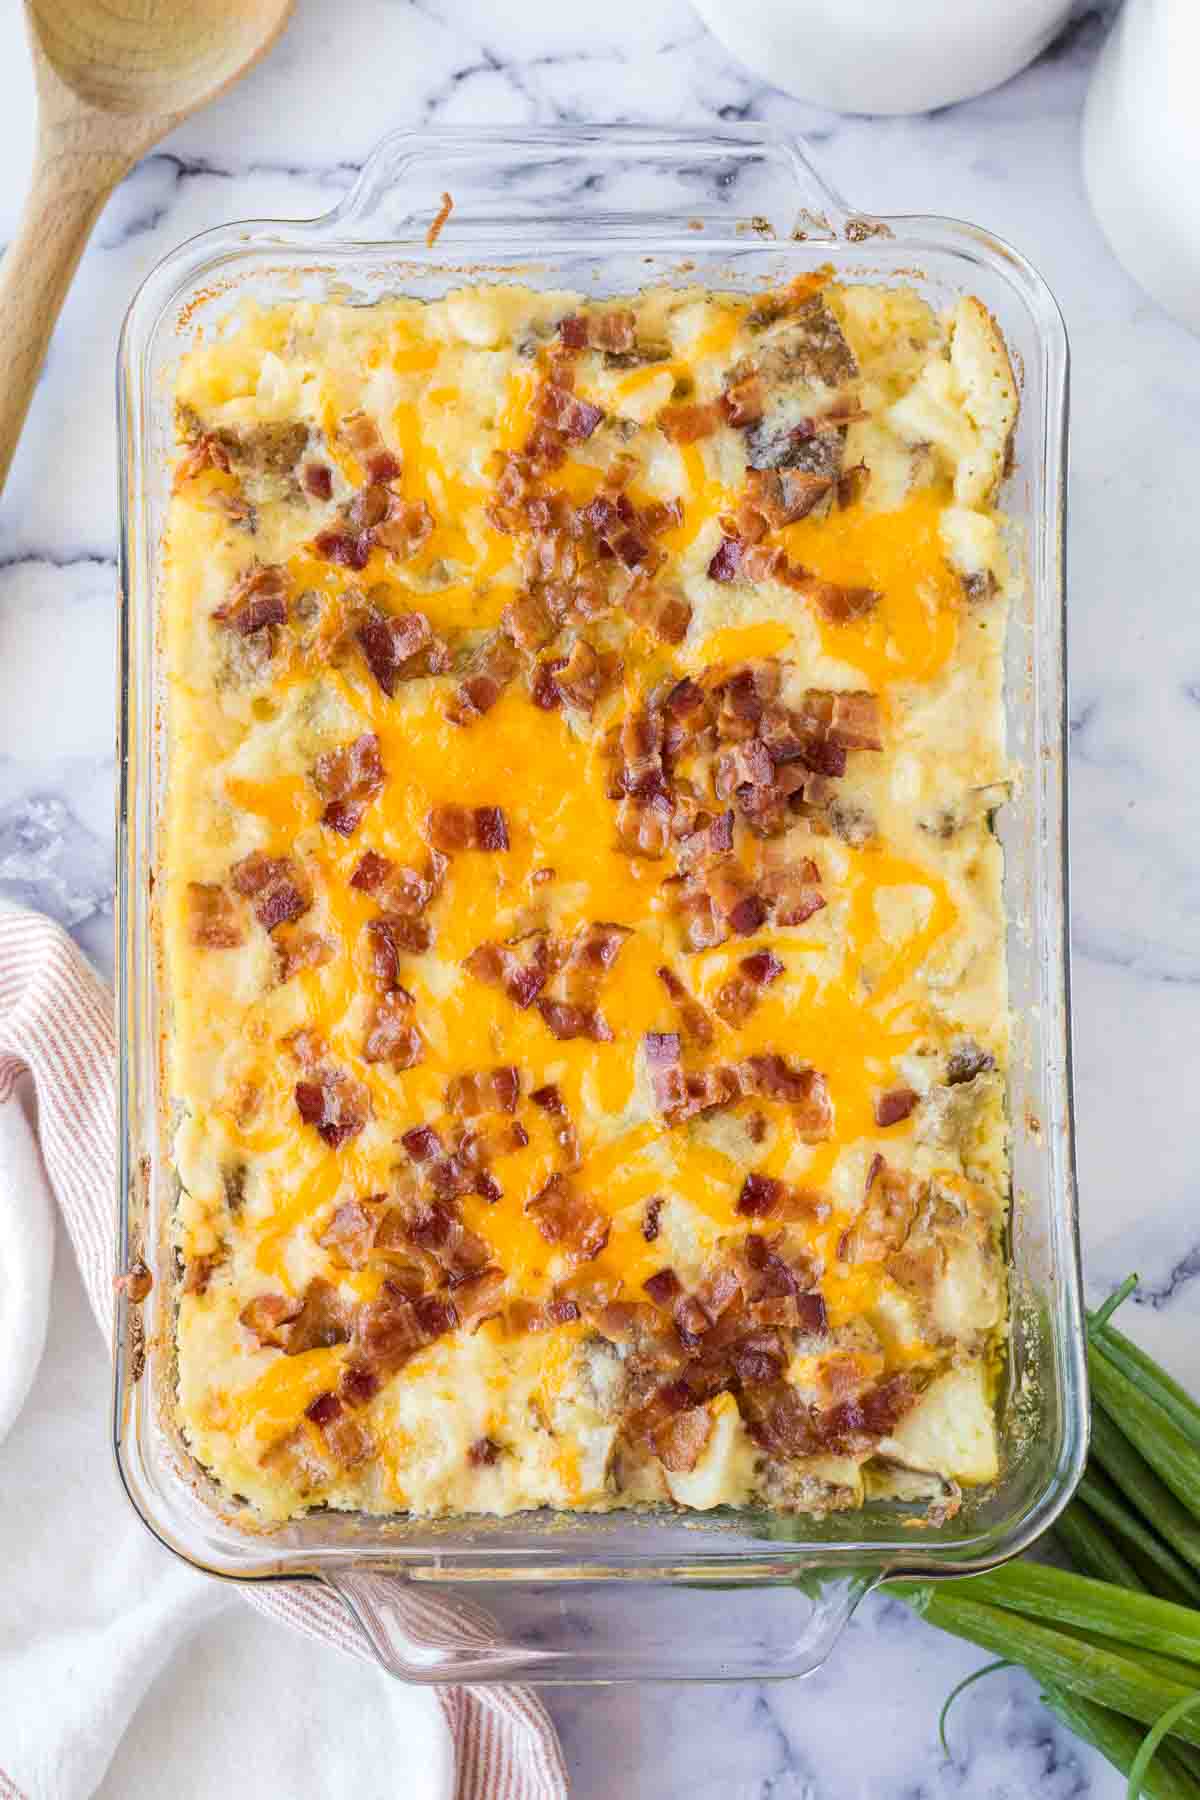 twice baked casserole in a dish